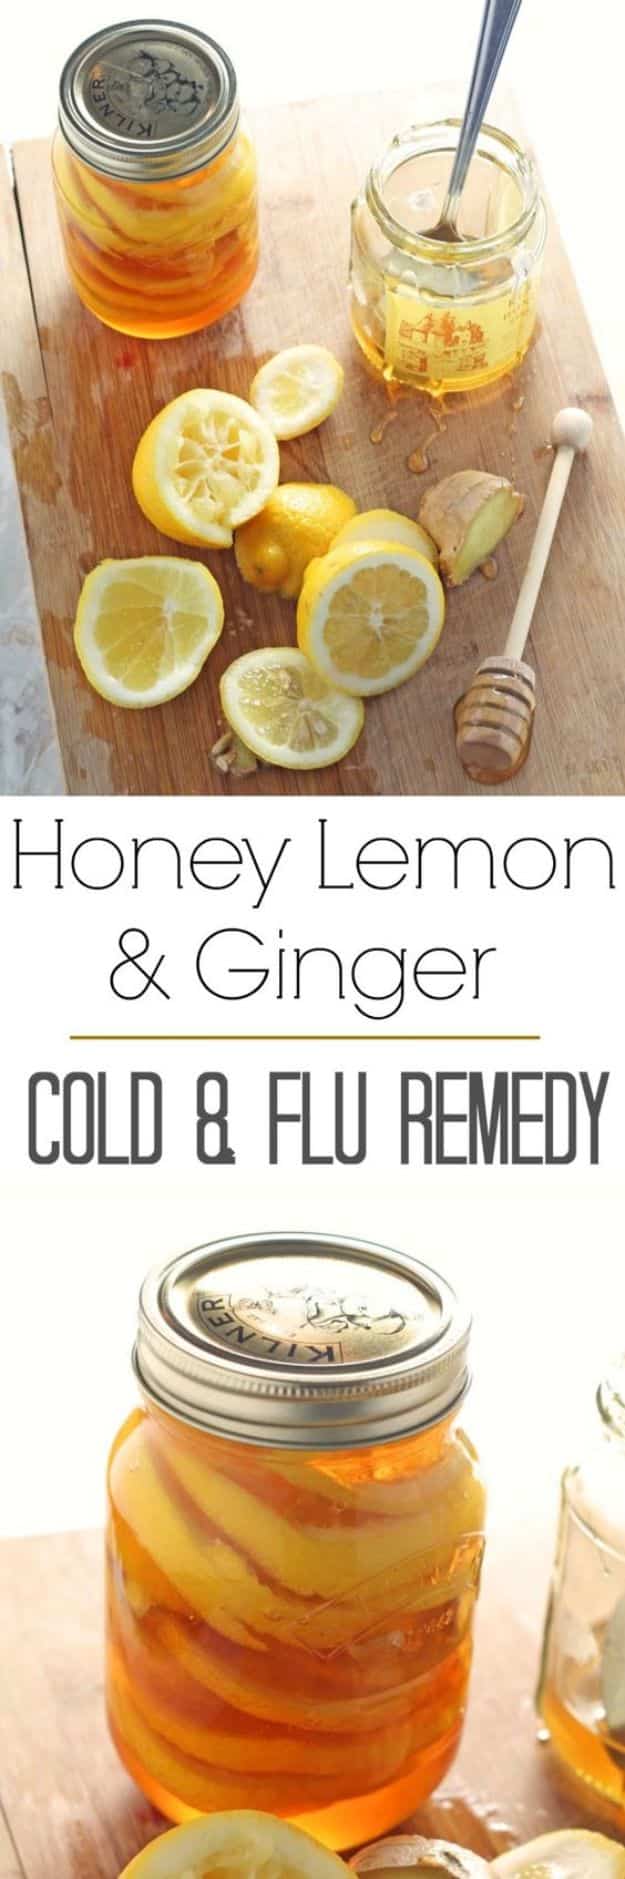 DIY Home Remedies - Honey Lemon & Ginger Jar - Homemade Recipes and Ideas for Help Relieve Symptoms of Cold and Flu, Upset Stomach, Rash, Cough, Sore Throat, Headache and Illness - Skincare Products, Balms, Lotions and Teas 